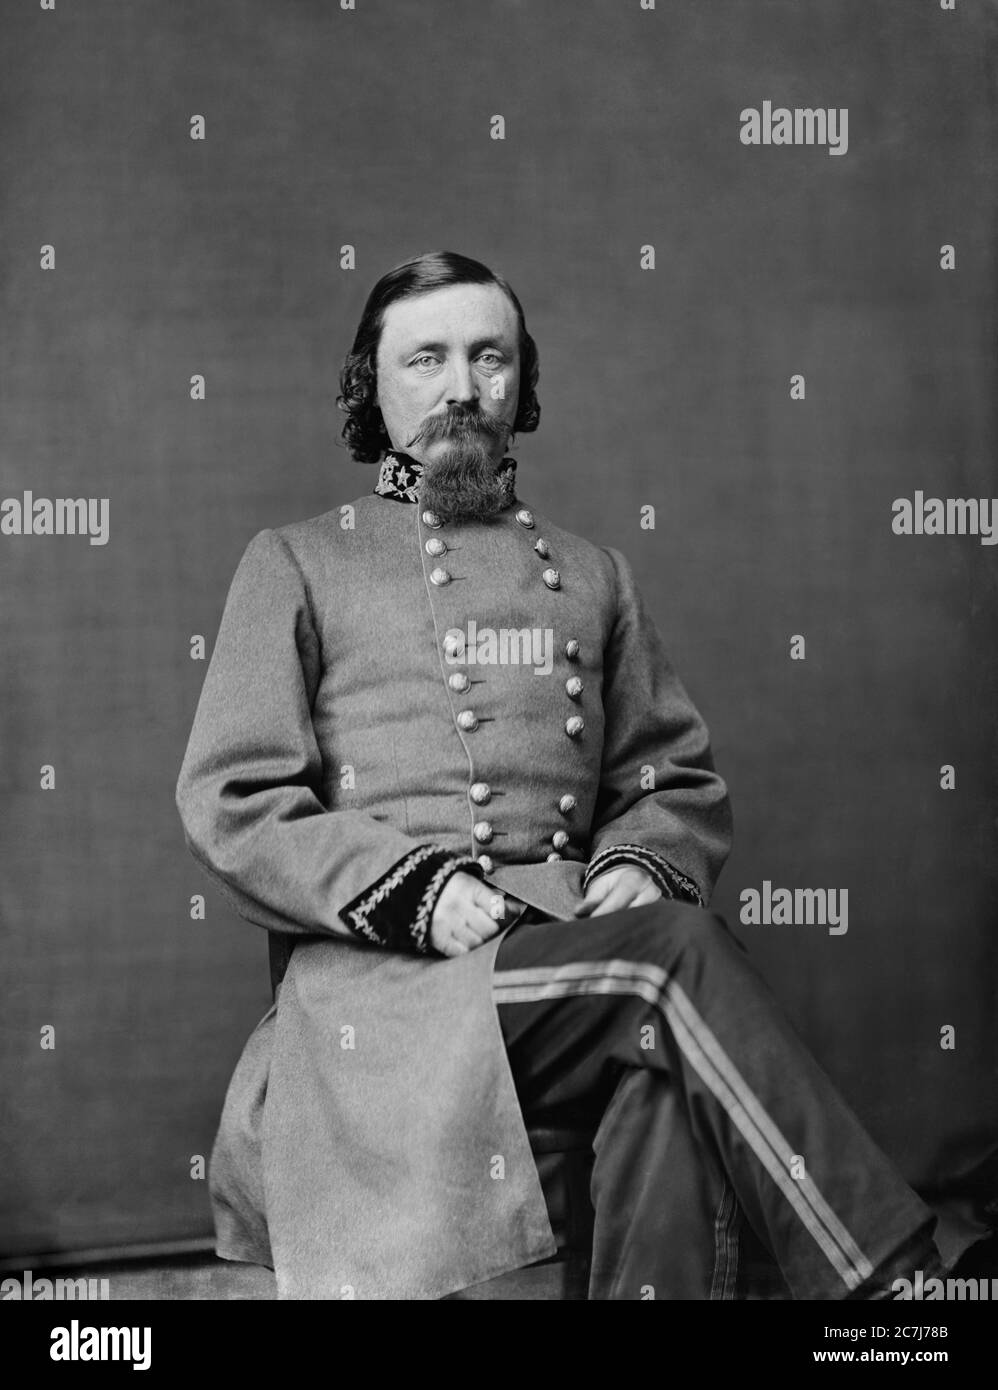 George Pickett, General, Confederate States Army, American Civil War, Seated Portrait, Brady-Handy photograph collection, 1860's Stock Photo